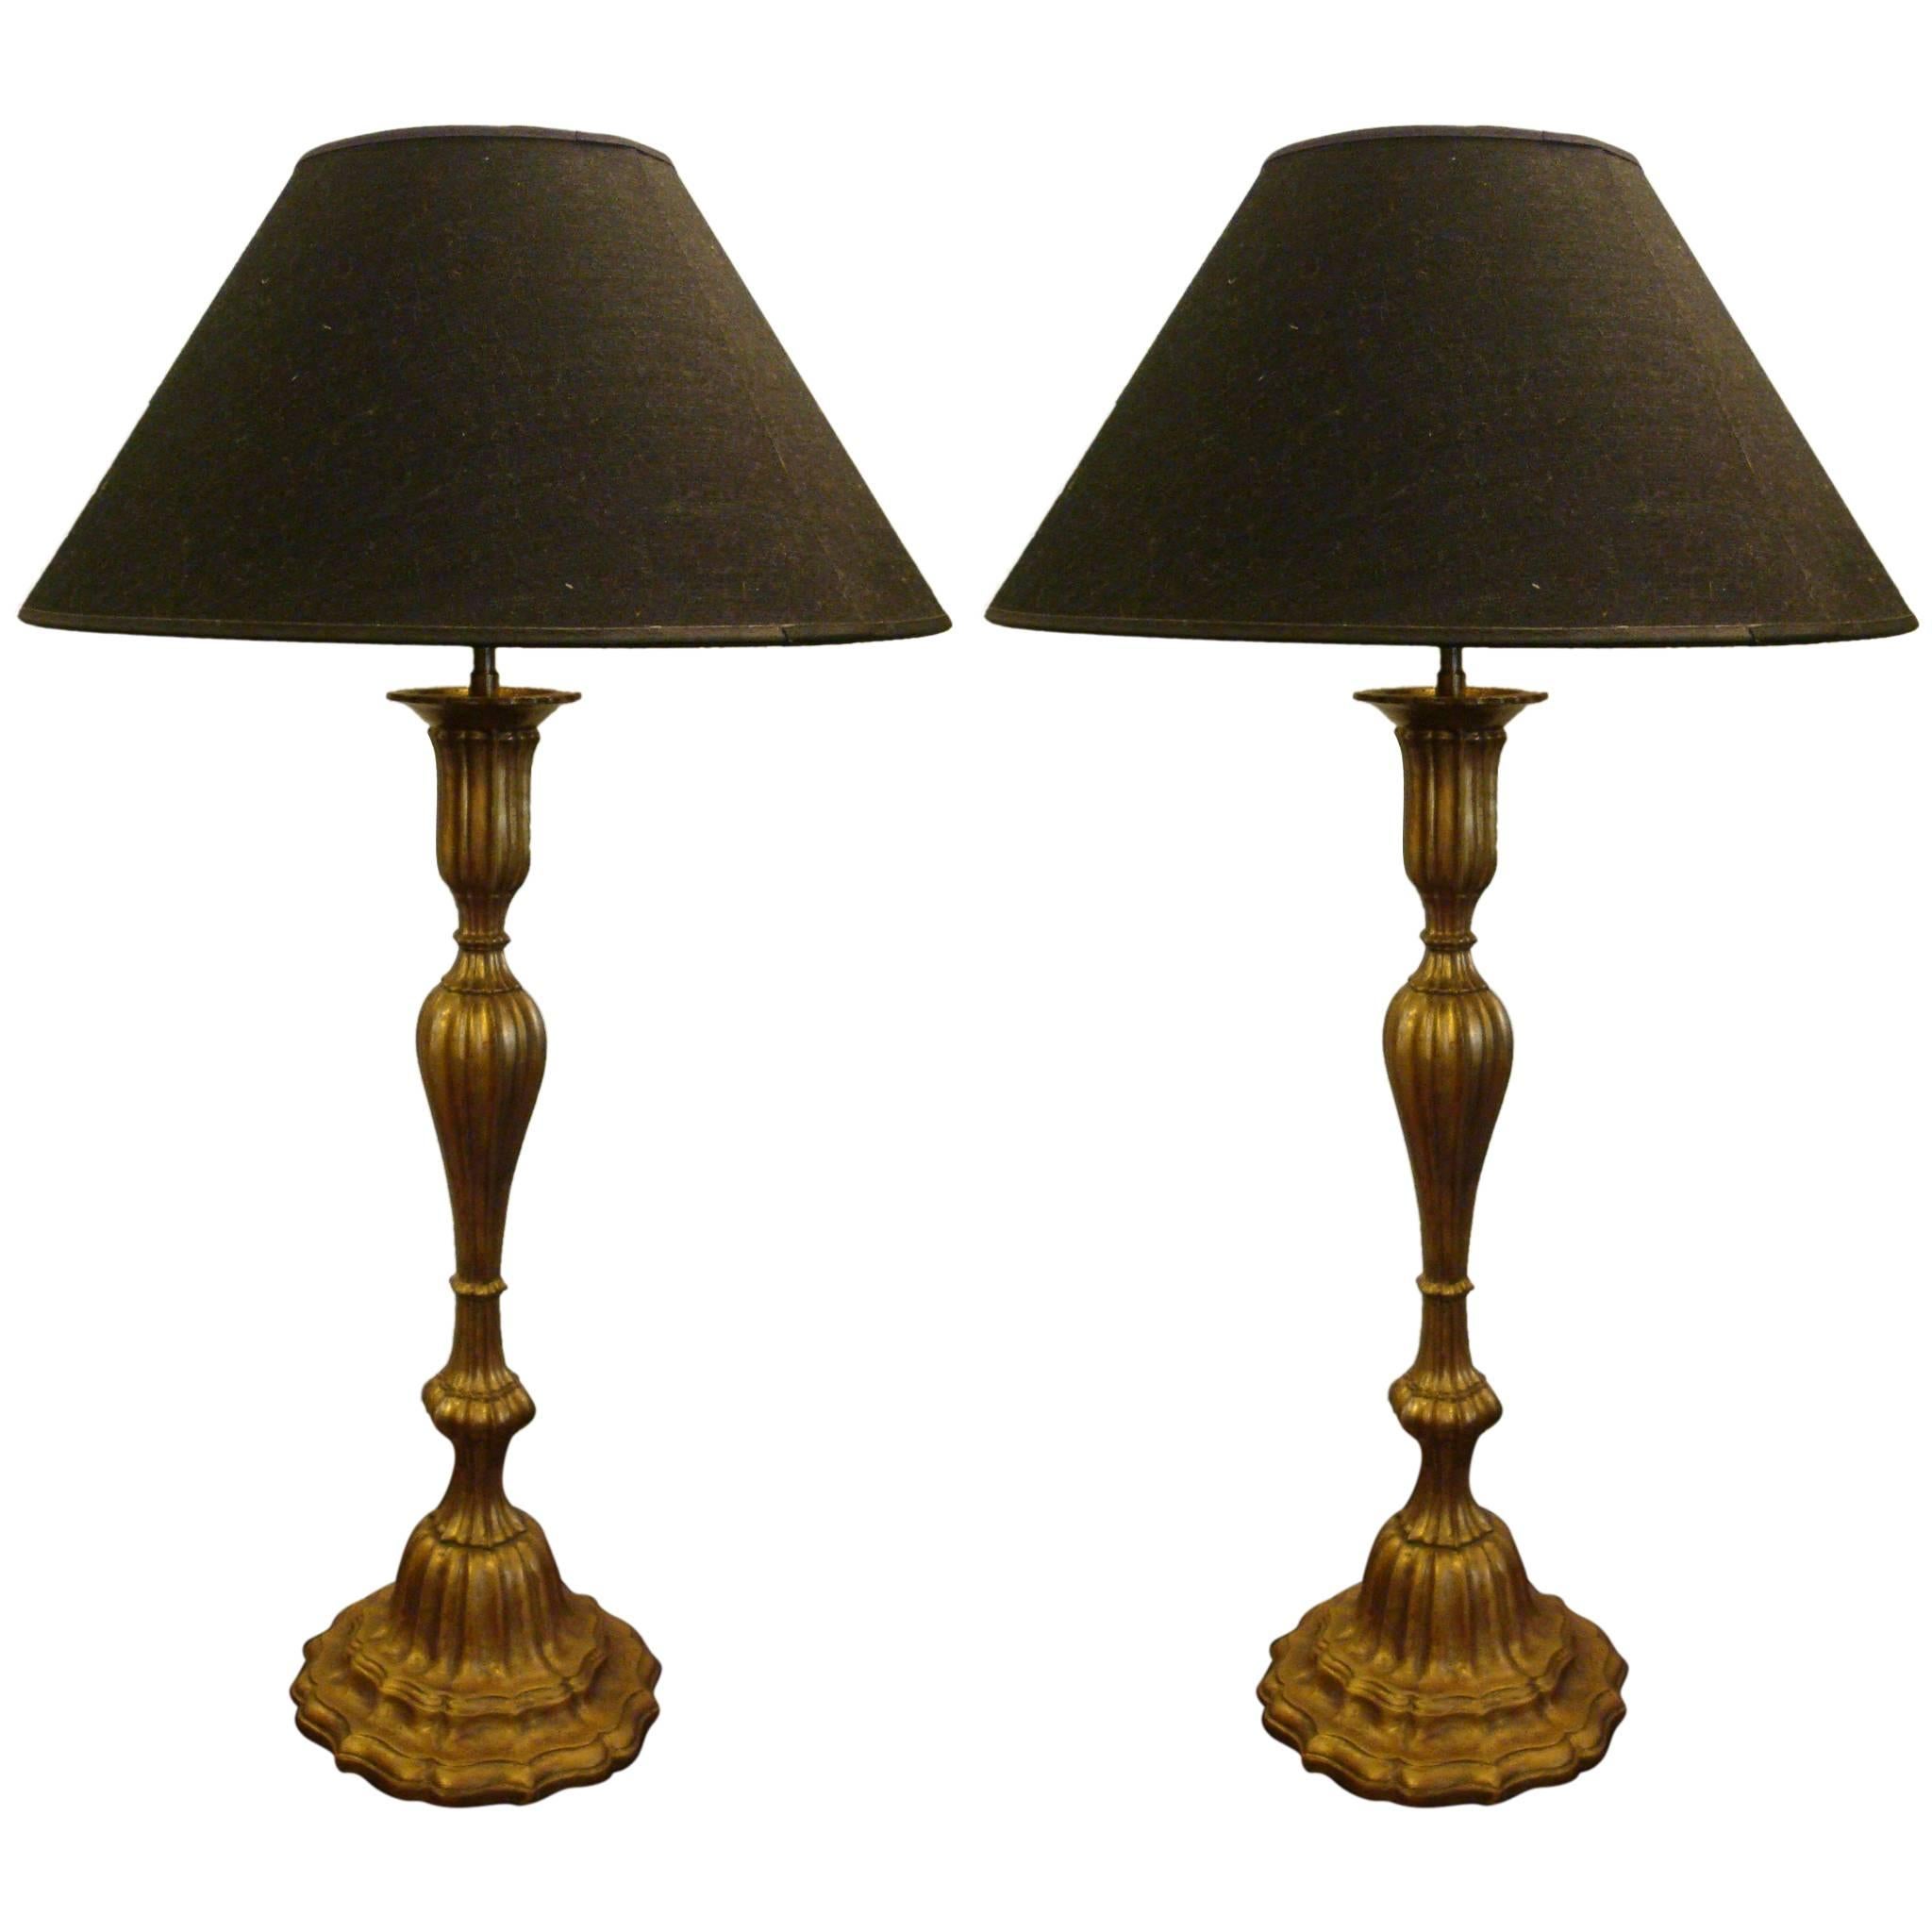 Pair of Giltwood and Brass Table Lamps, Wiener Secession